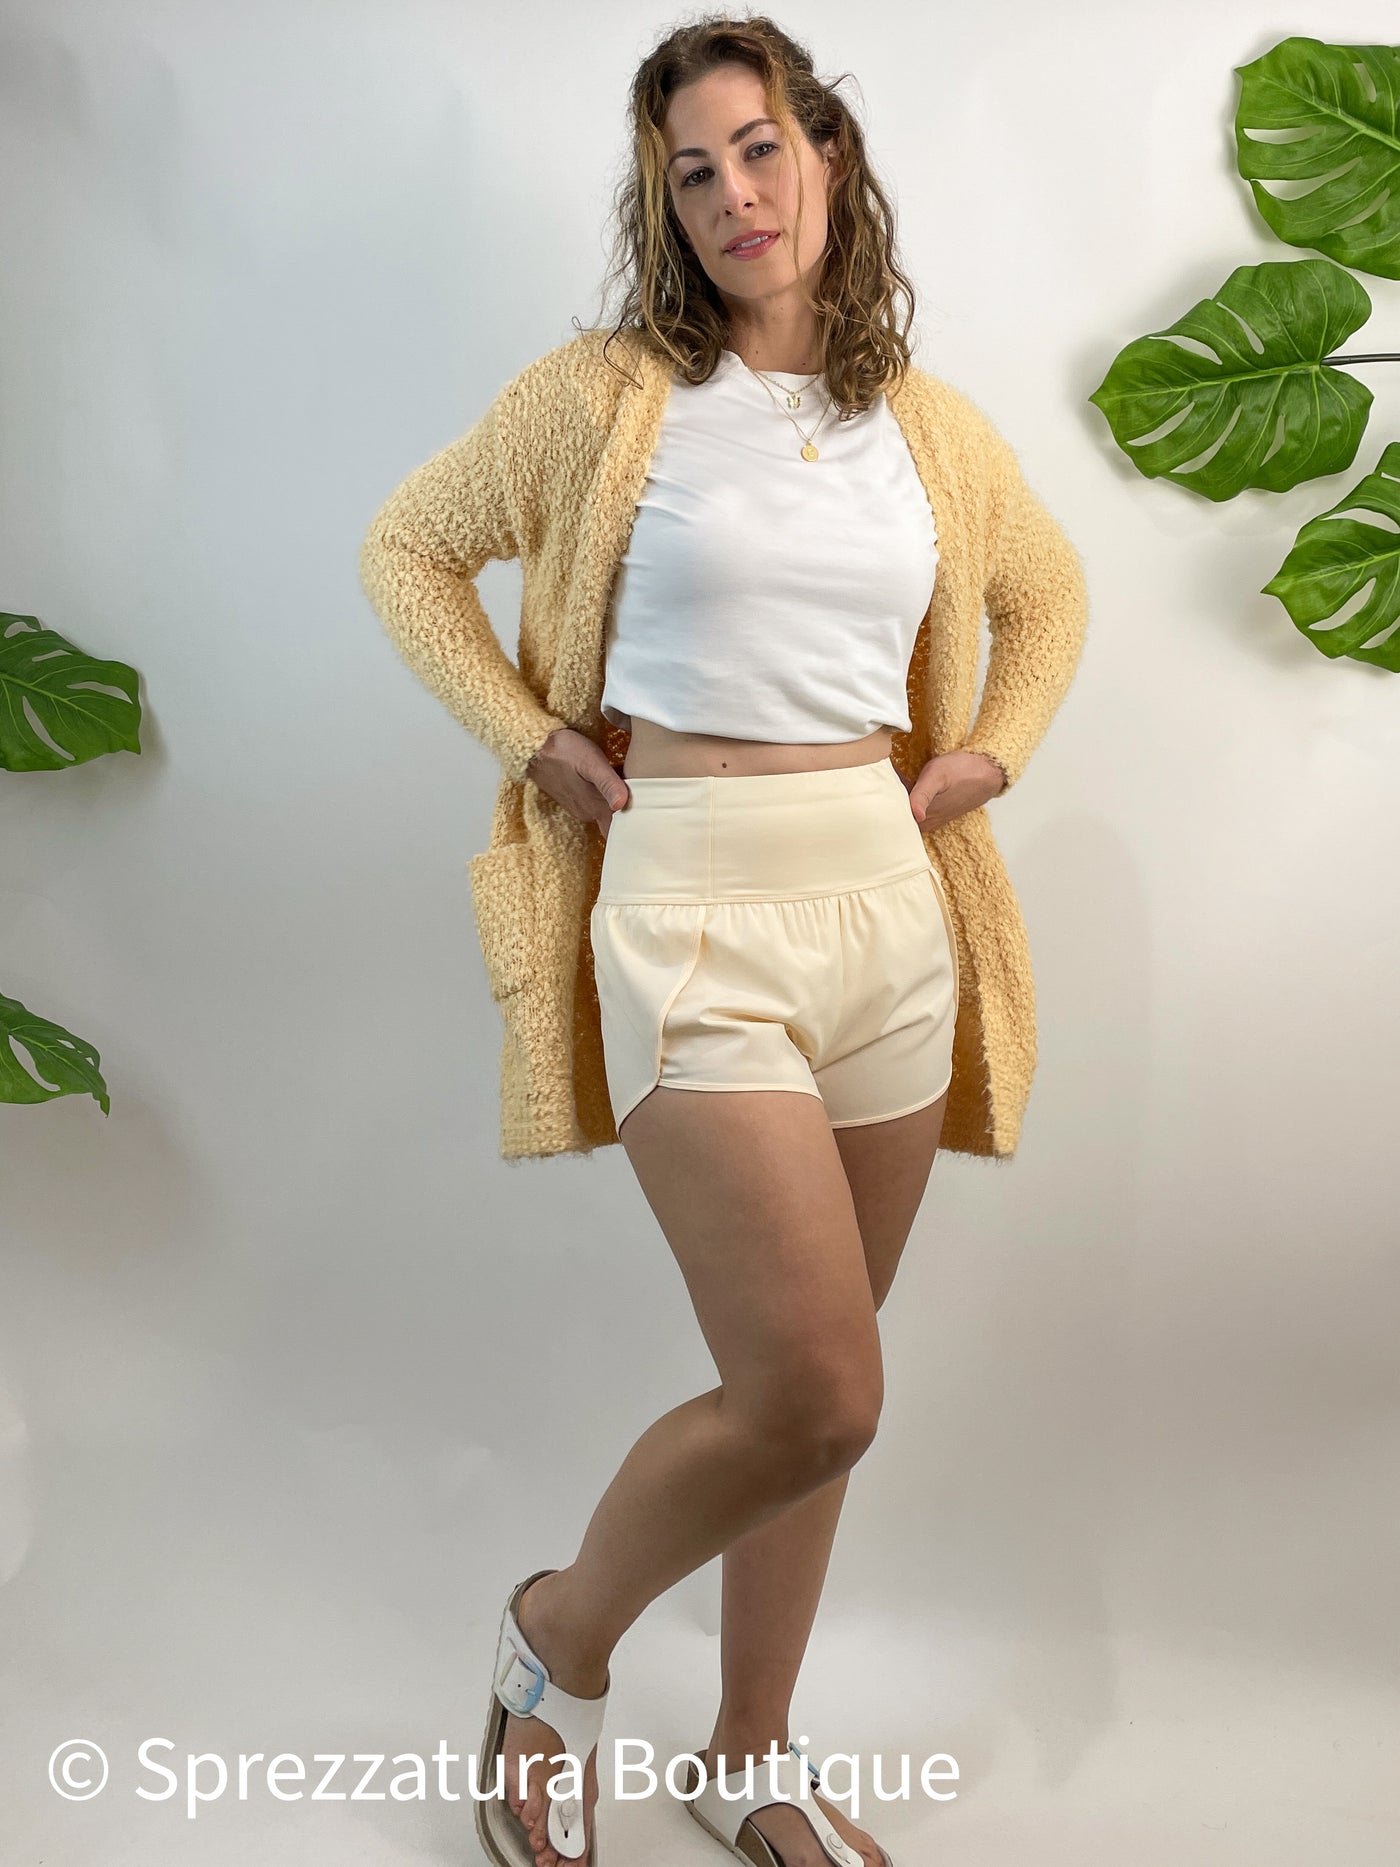 Light yellow pastel orange exercise altheisure shorts loungewear fall summer style women's lightweight quick dry lined creamy. Modern smart causal female chic effortless outfit womens ladies gift elegant effortless clothing clothes apparel outfits chic summer style women’s boutique trendy cute outfit